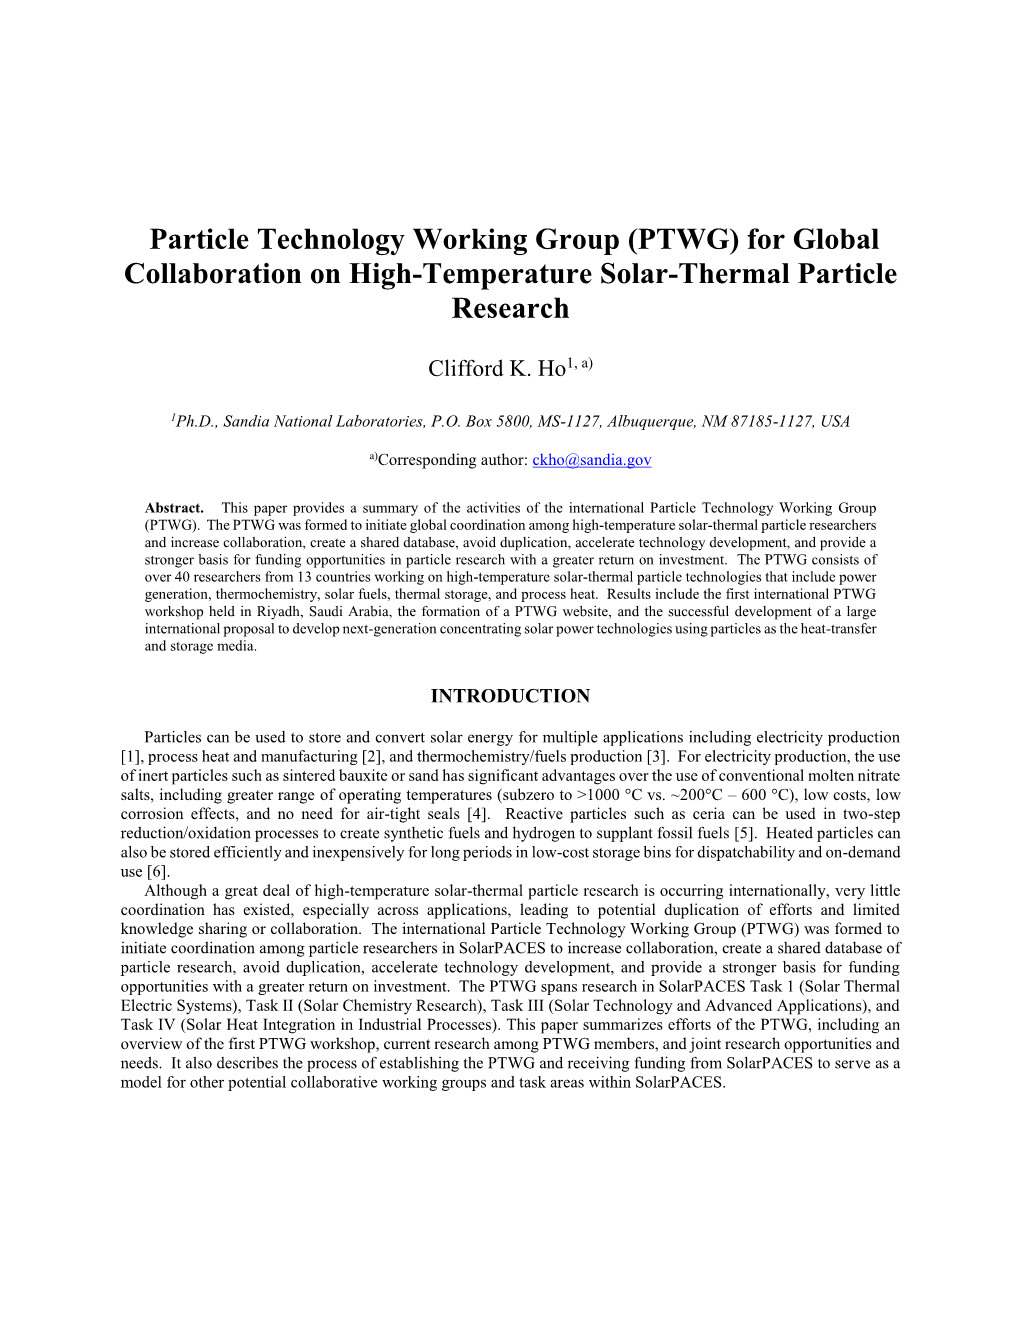 PTWG) for Global Collaboration on High-Temperature Solar-Thermal Particle Research